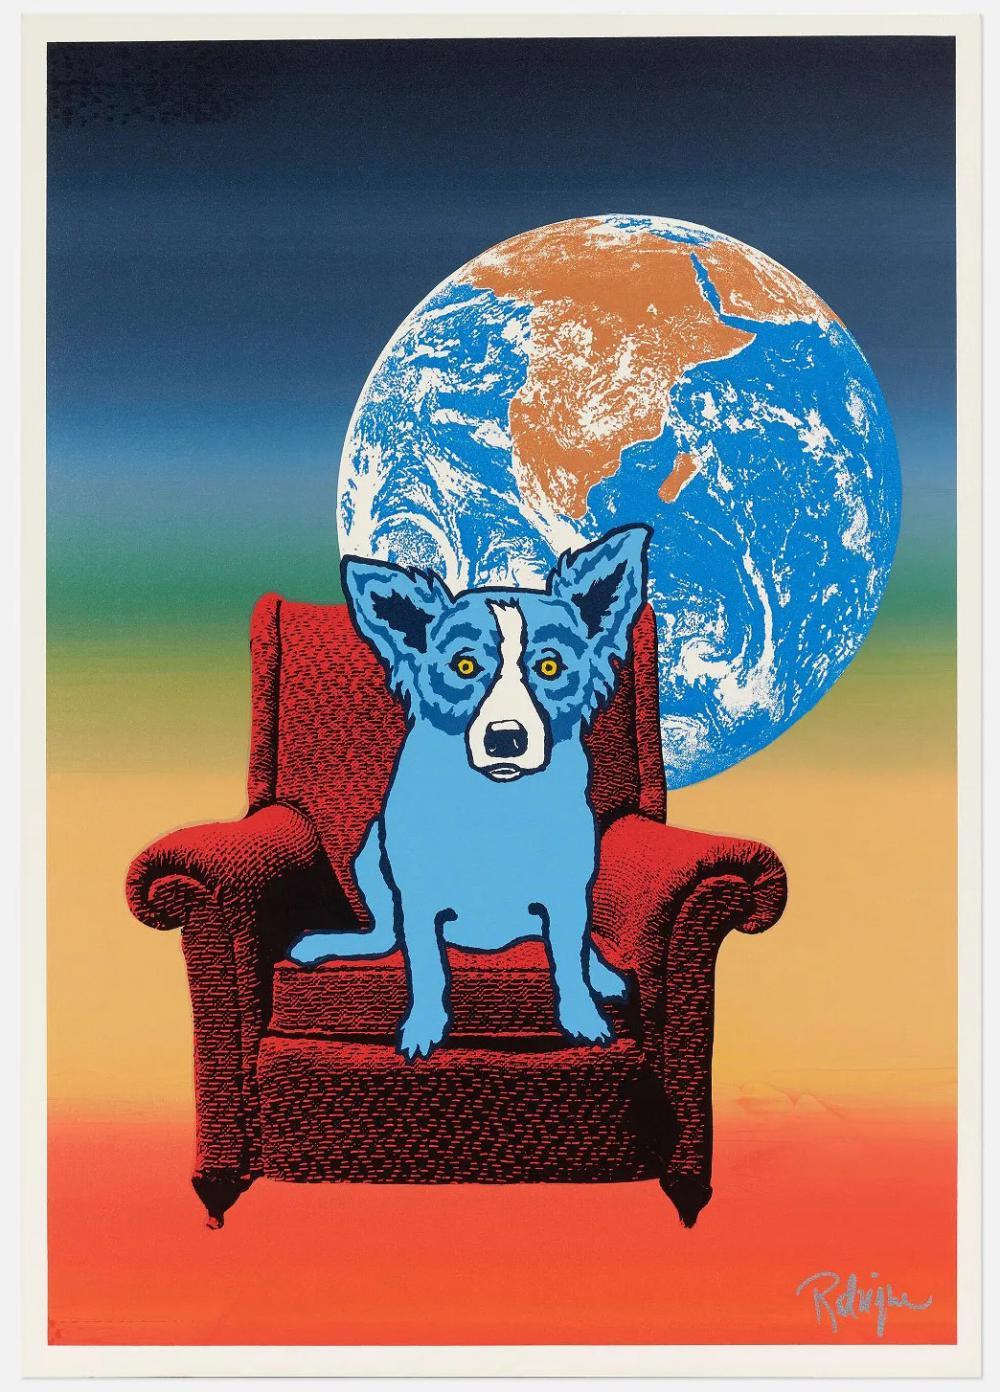 George Rodrigue Animal Print - GEORGE RODRIGUE - SPACE CHAIR 1992, SIGNED & NUMBERED UNIQUE SILKSCREEN